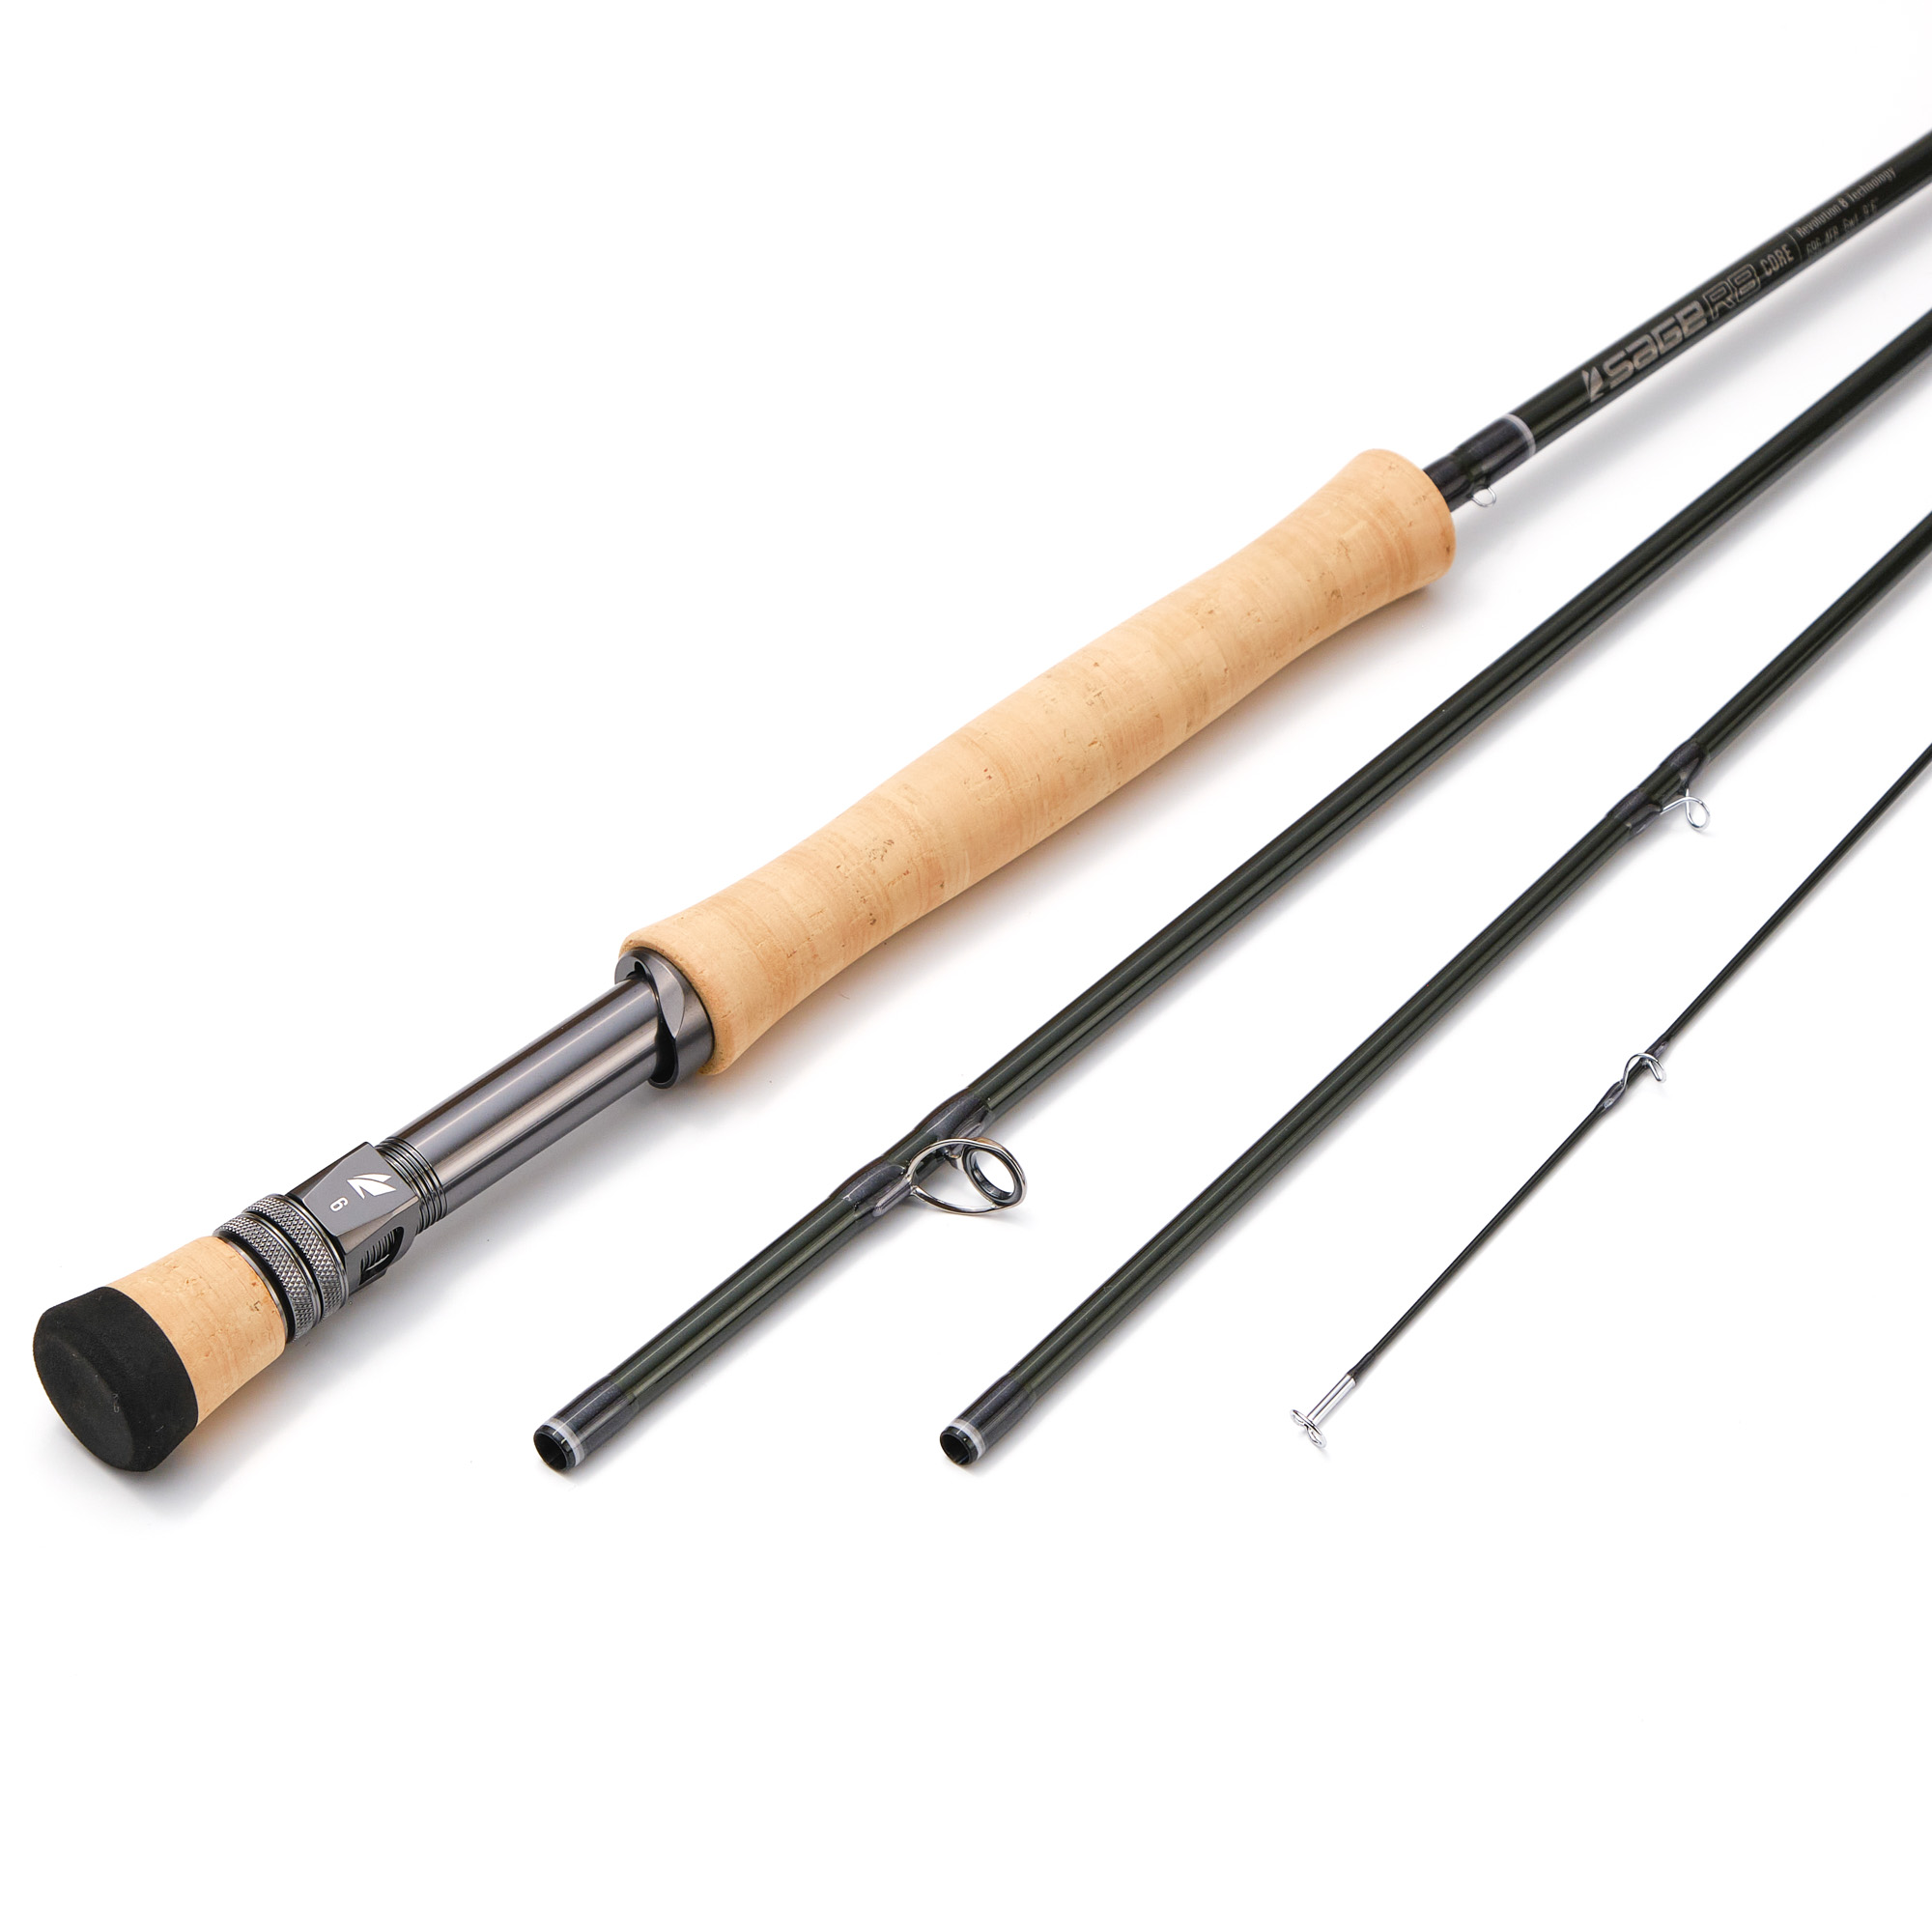  Sage Fly Fishing - 586-4 Trout LL Rod - 5 Weight, 8'6 Fly Rod  : Sports & Outdoors